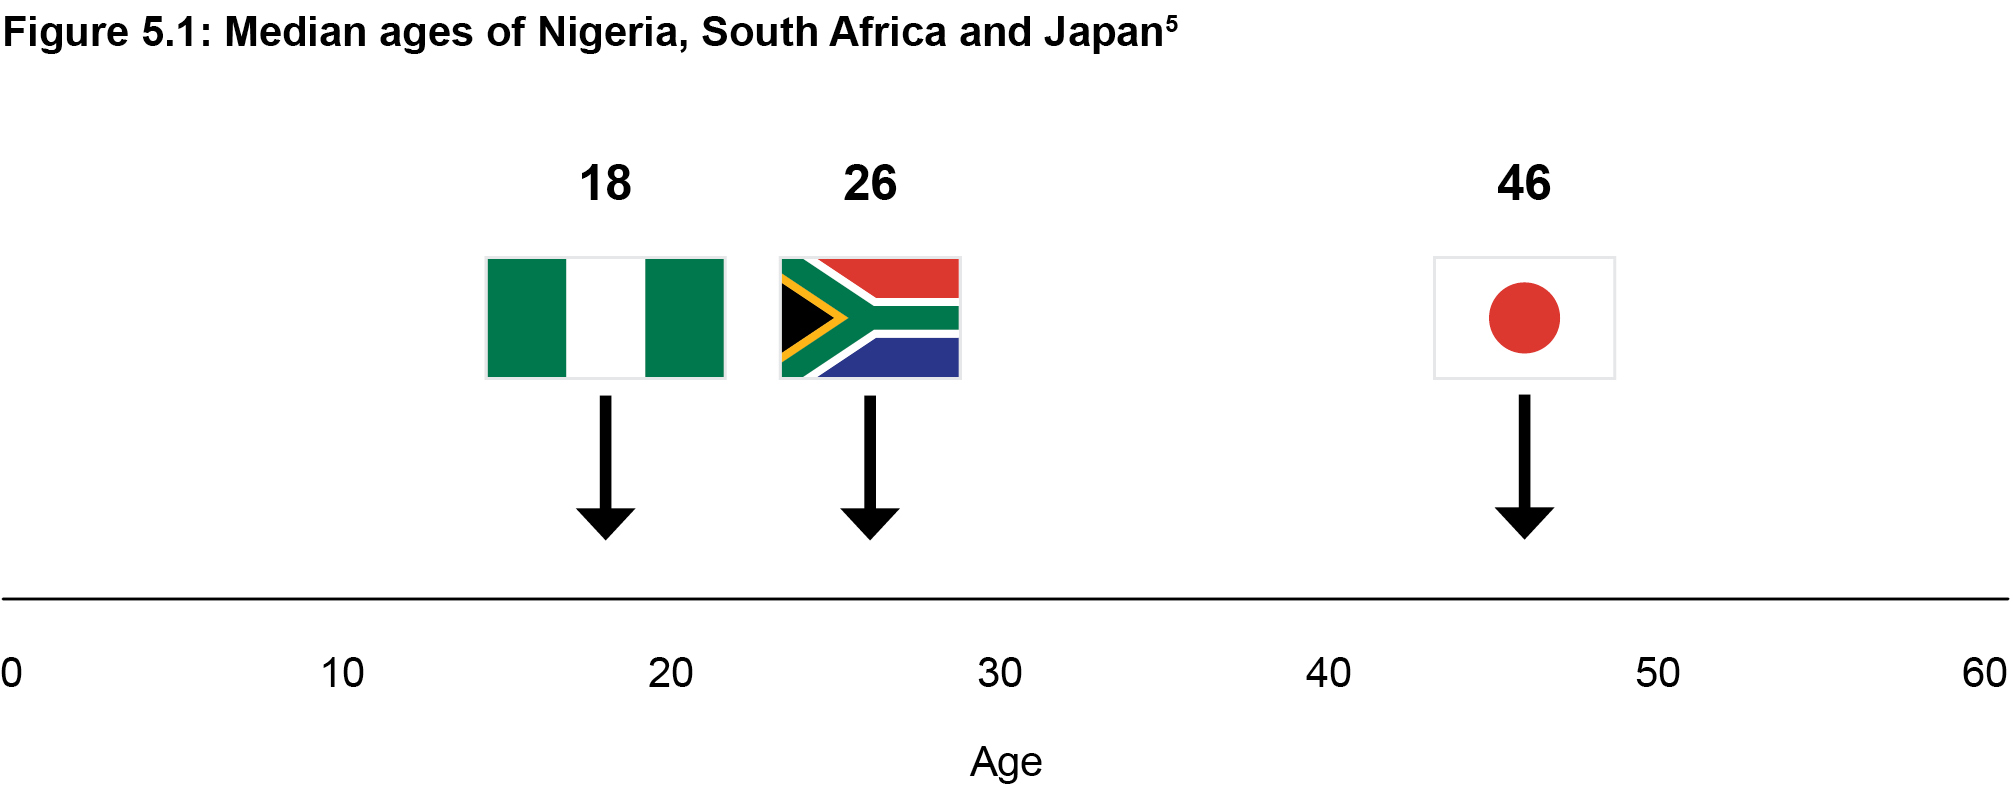 Figure 5.1: Median ages of Nigeria, South Africa and Japan